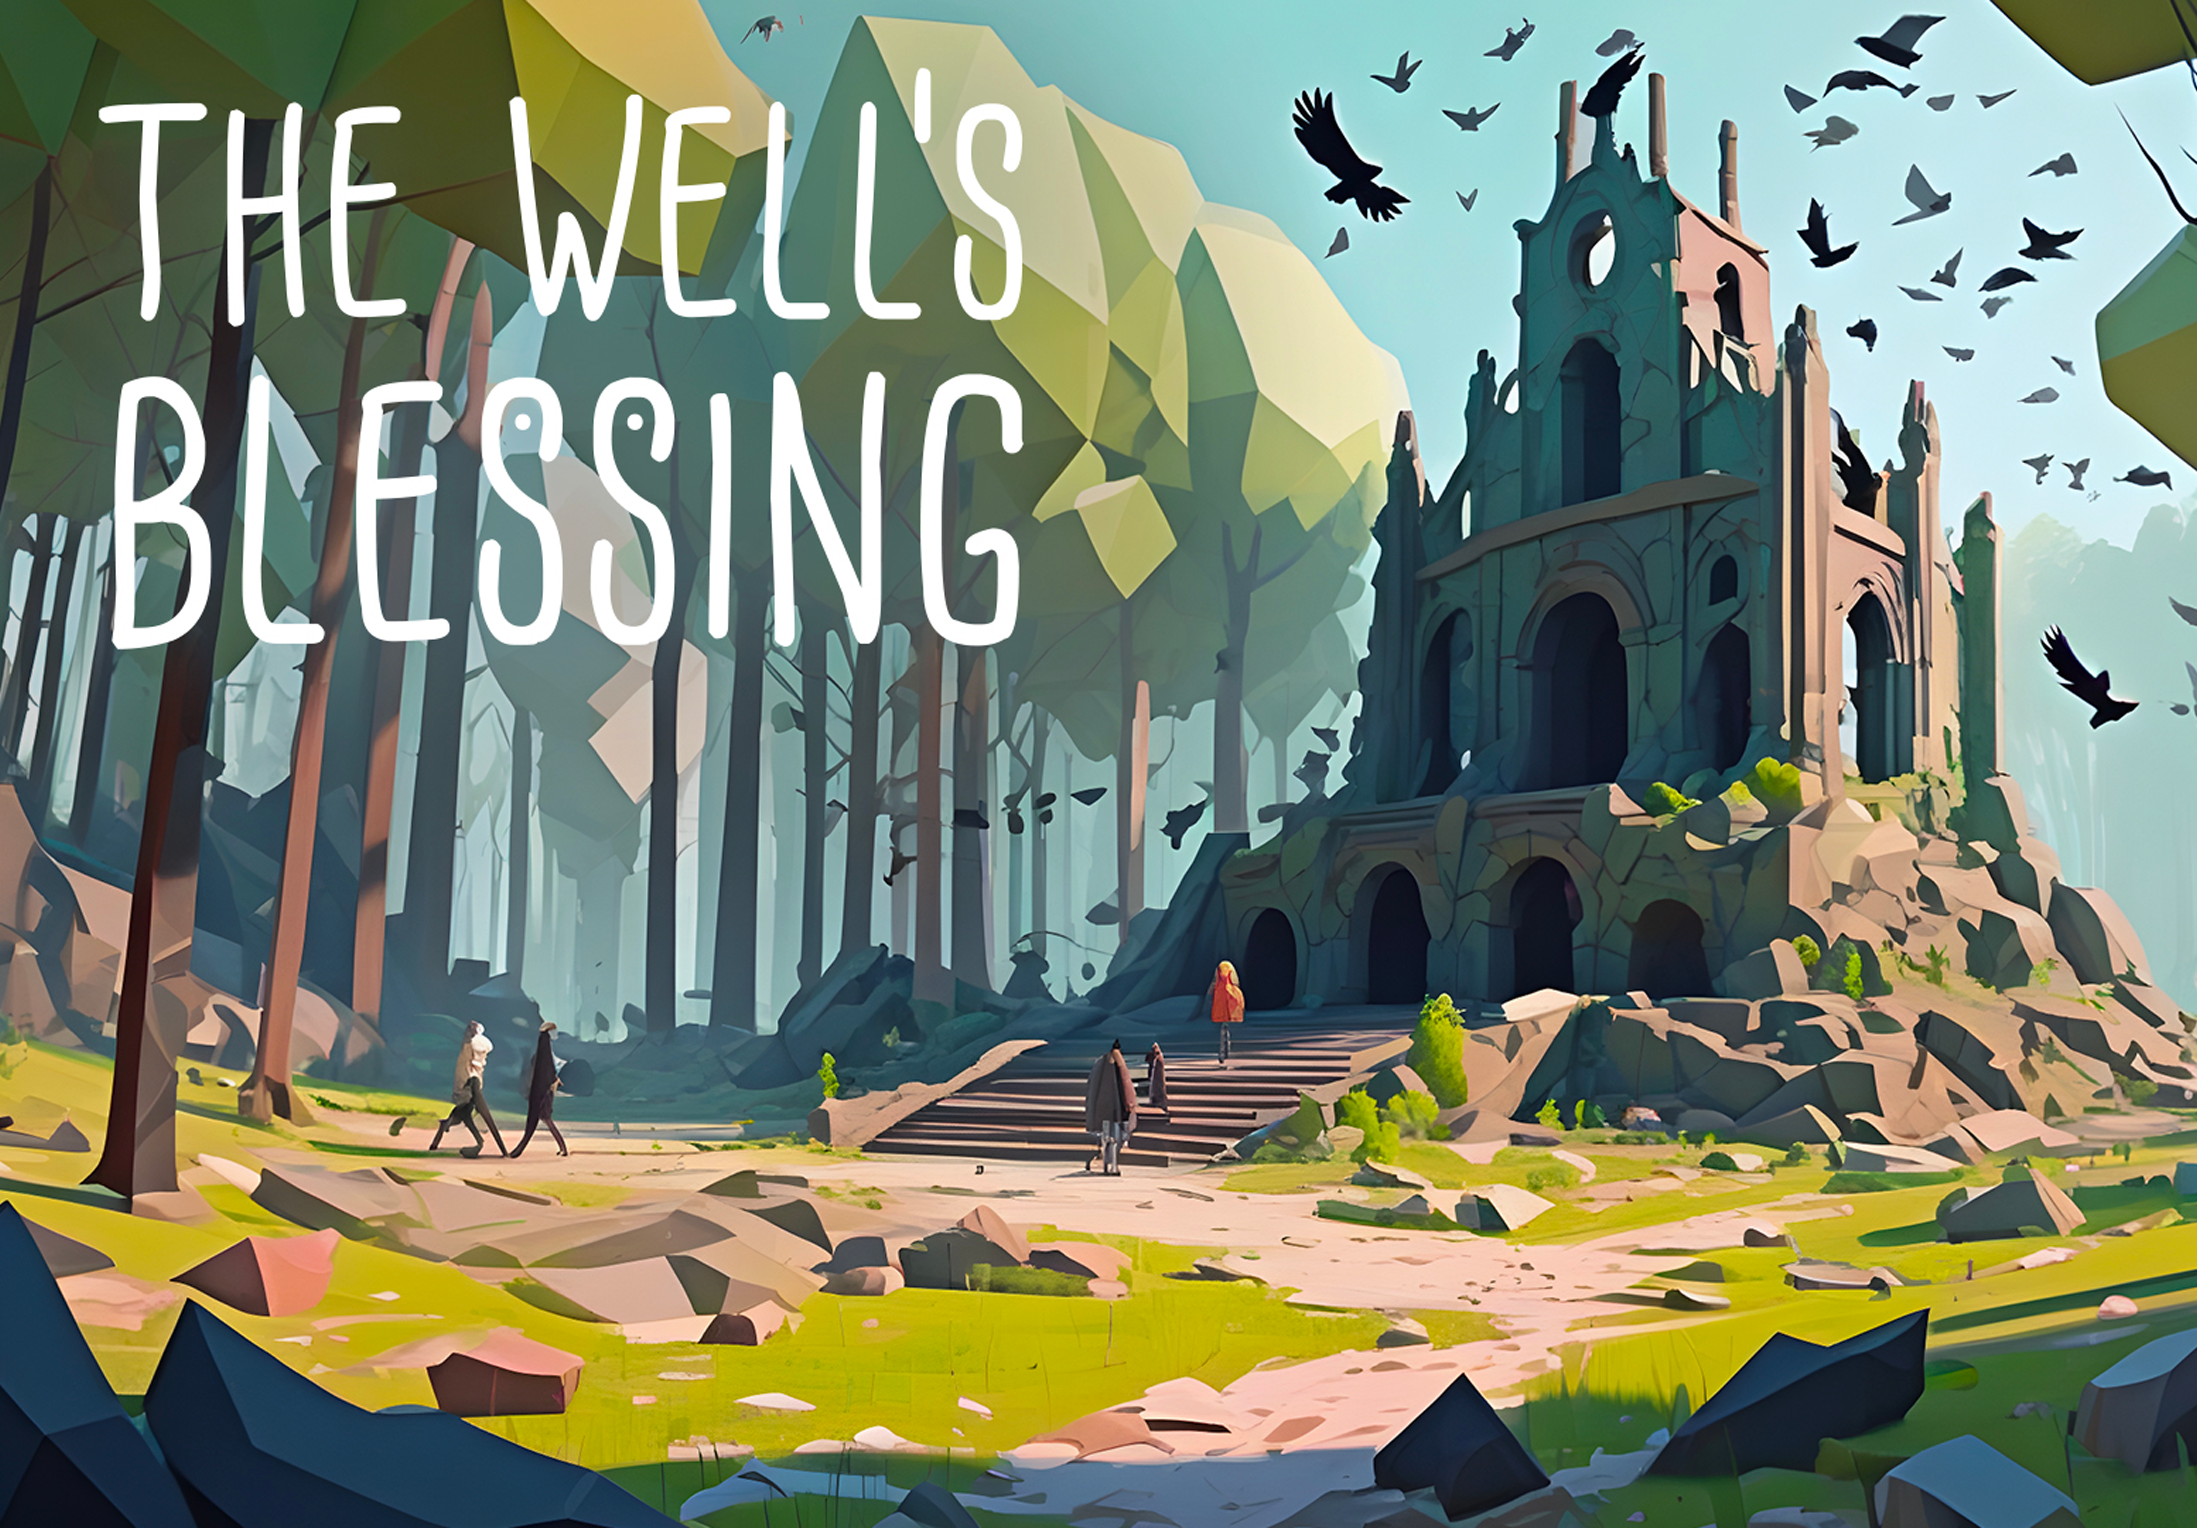 The Well's Blessing